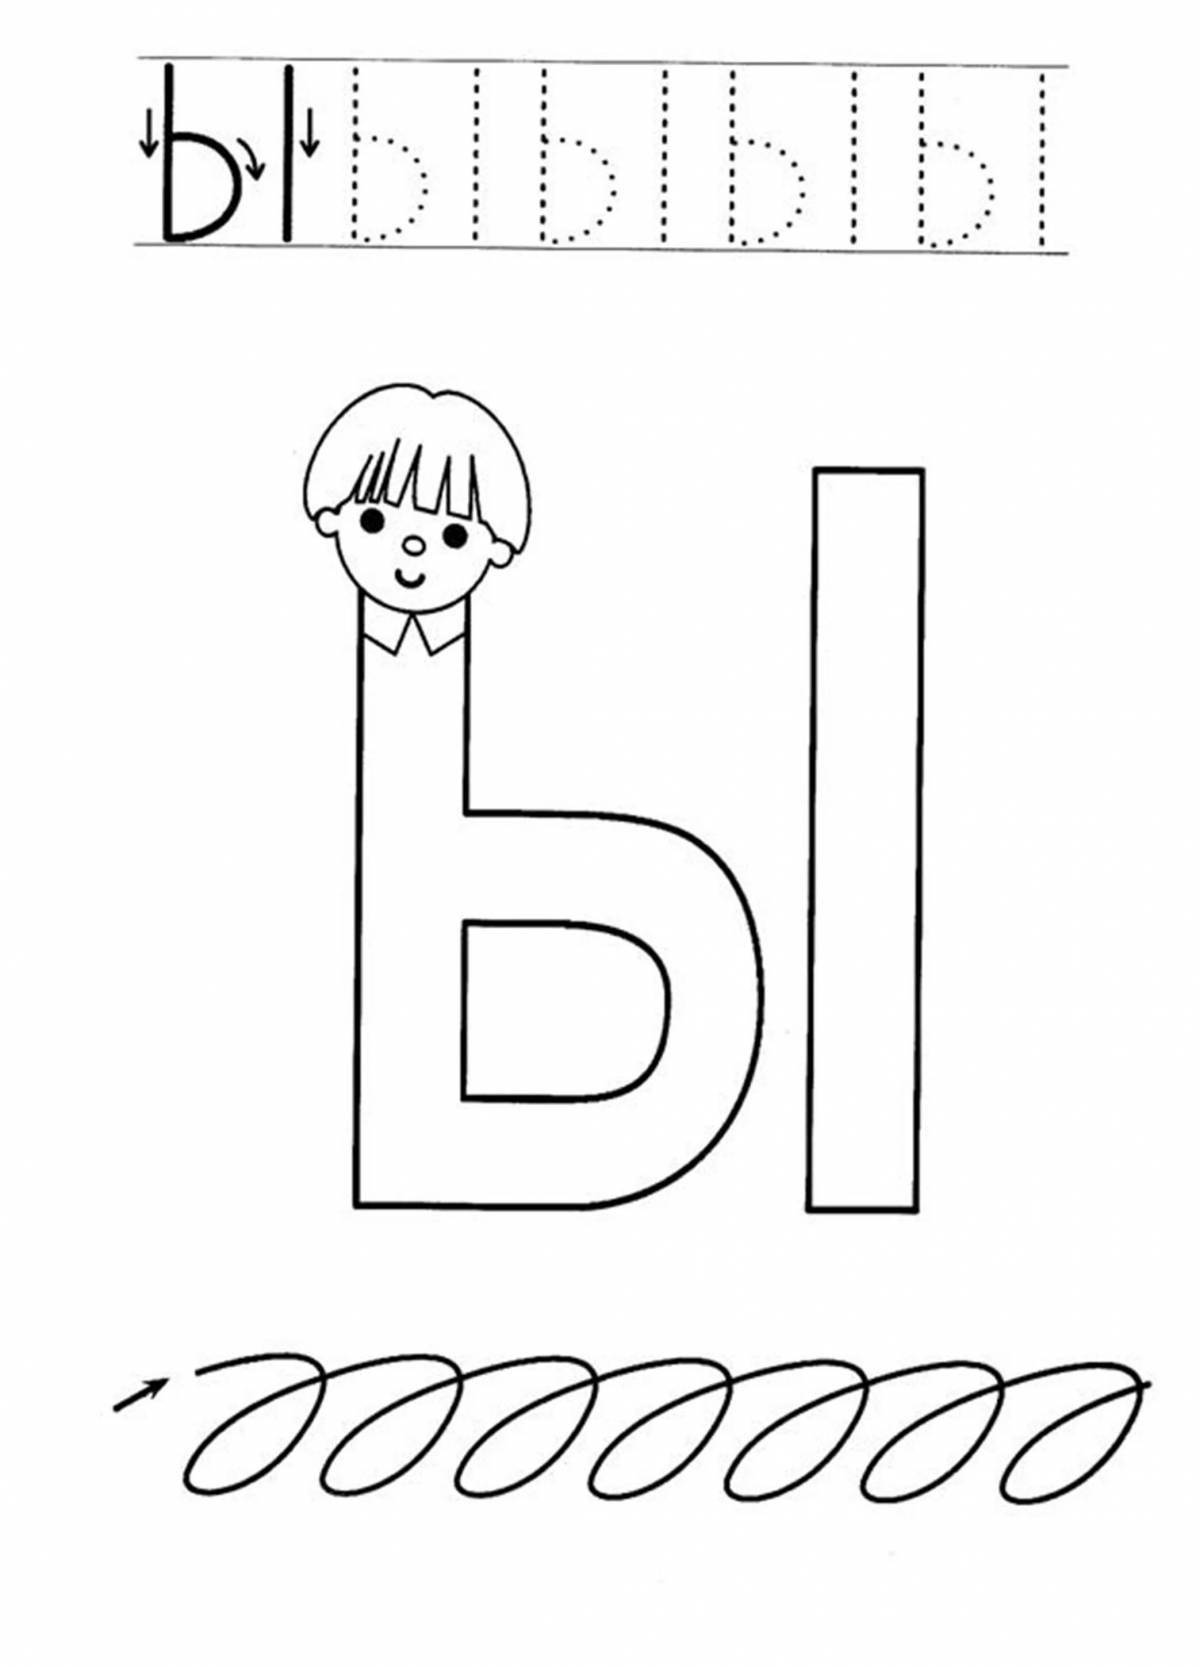 Adorable letter s coloring book for preschoolers